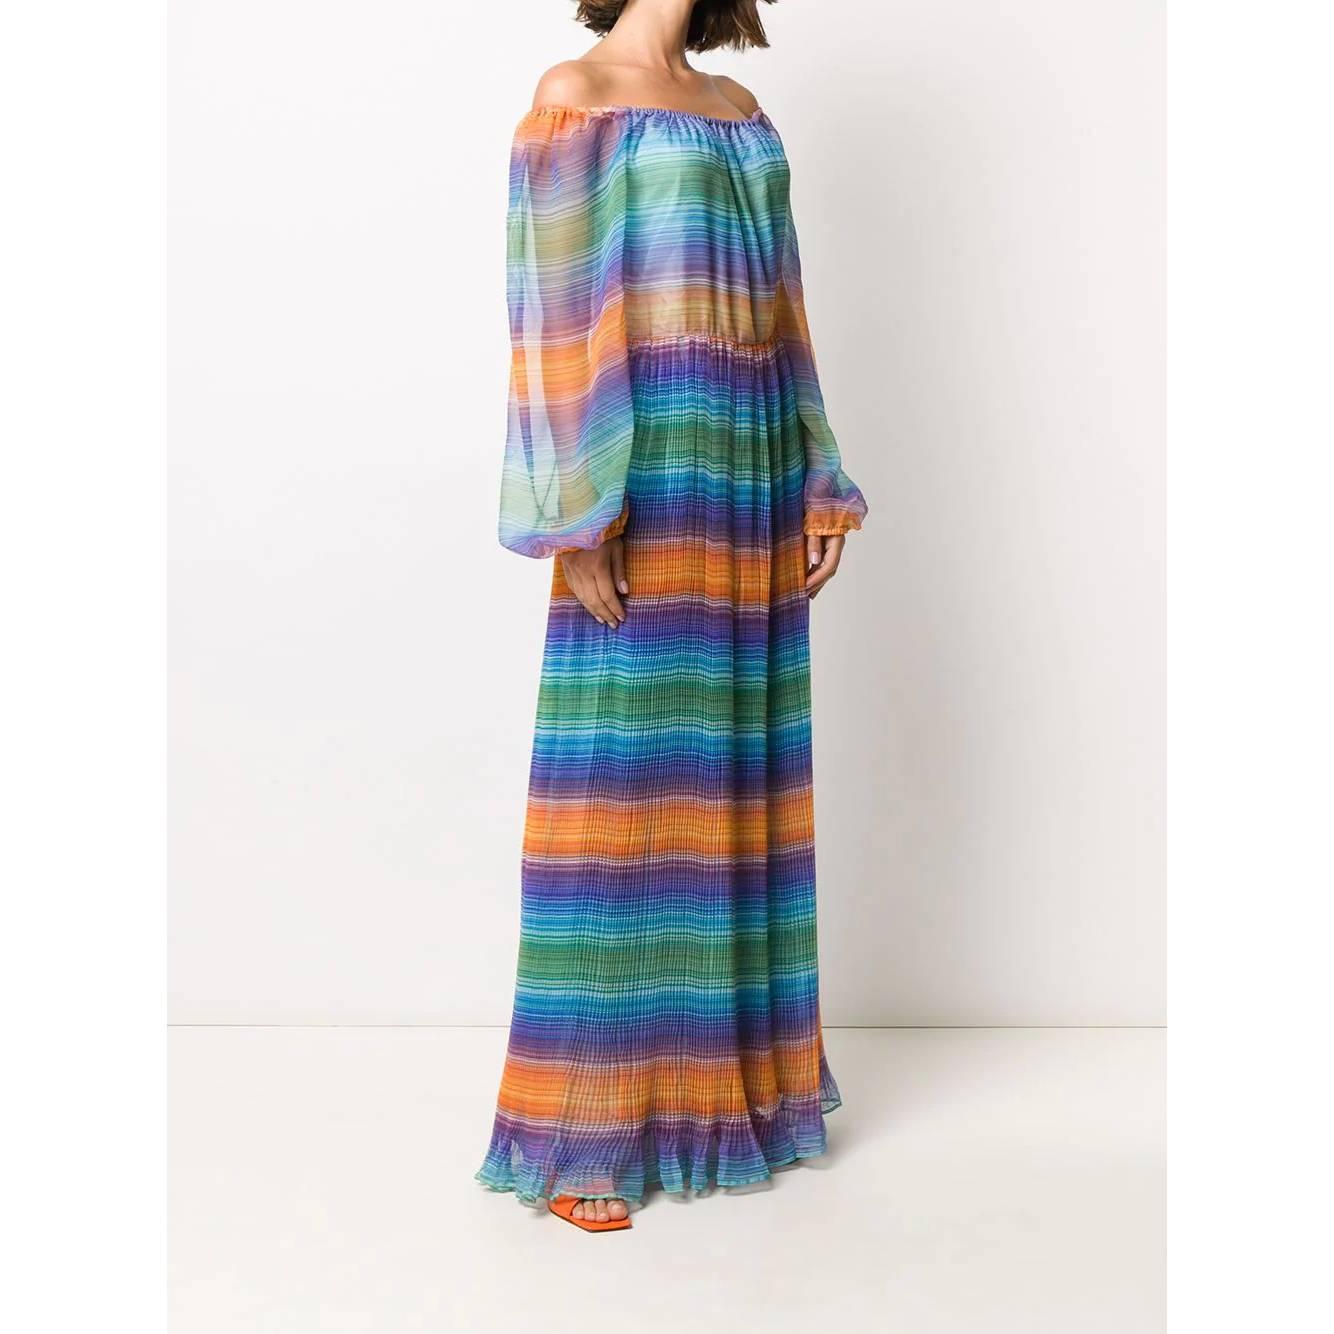 A.N.G.E.L.O. VINTAGE – Italy

A.N.G.E.L.O. Vintage Cult semitransparent multicolor maxi dress. Off-the-shoulder design, elasticated neckline, long puff sleeves, stretchy cuffs and fully pleated wide skirt with gathered hem. Side zip fastening and